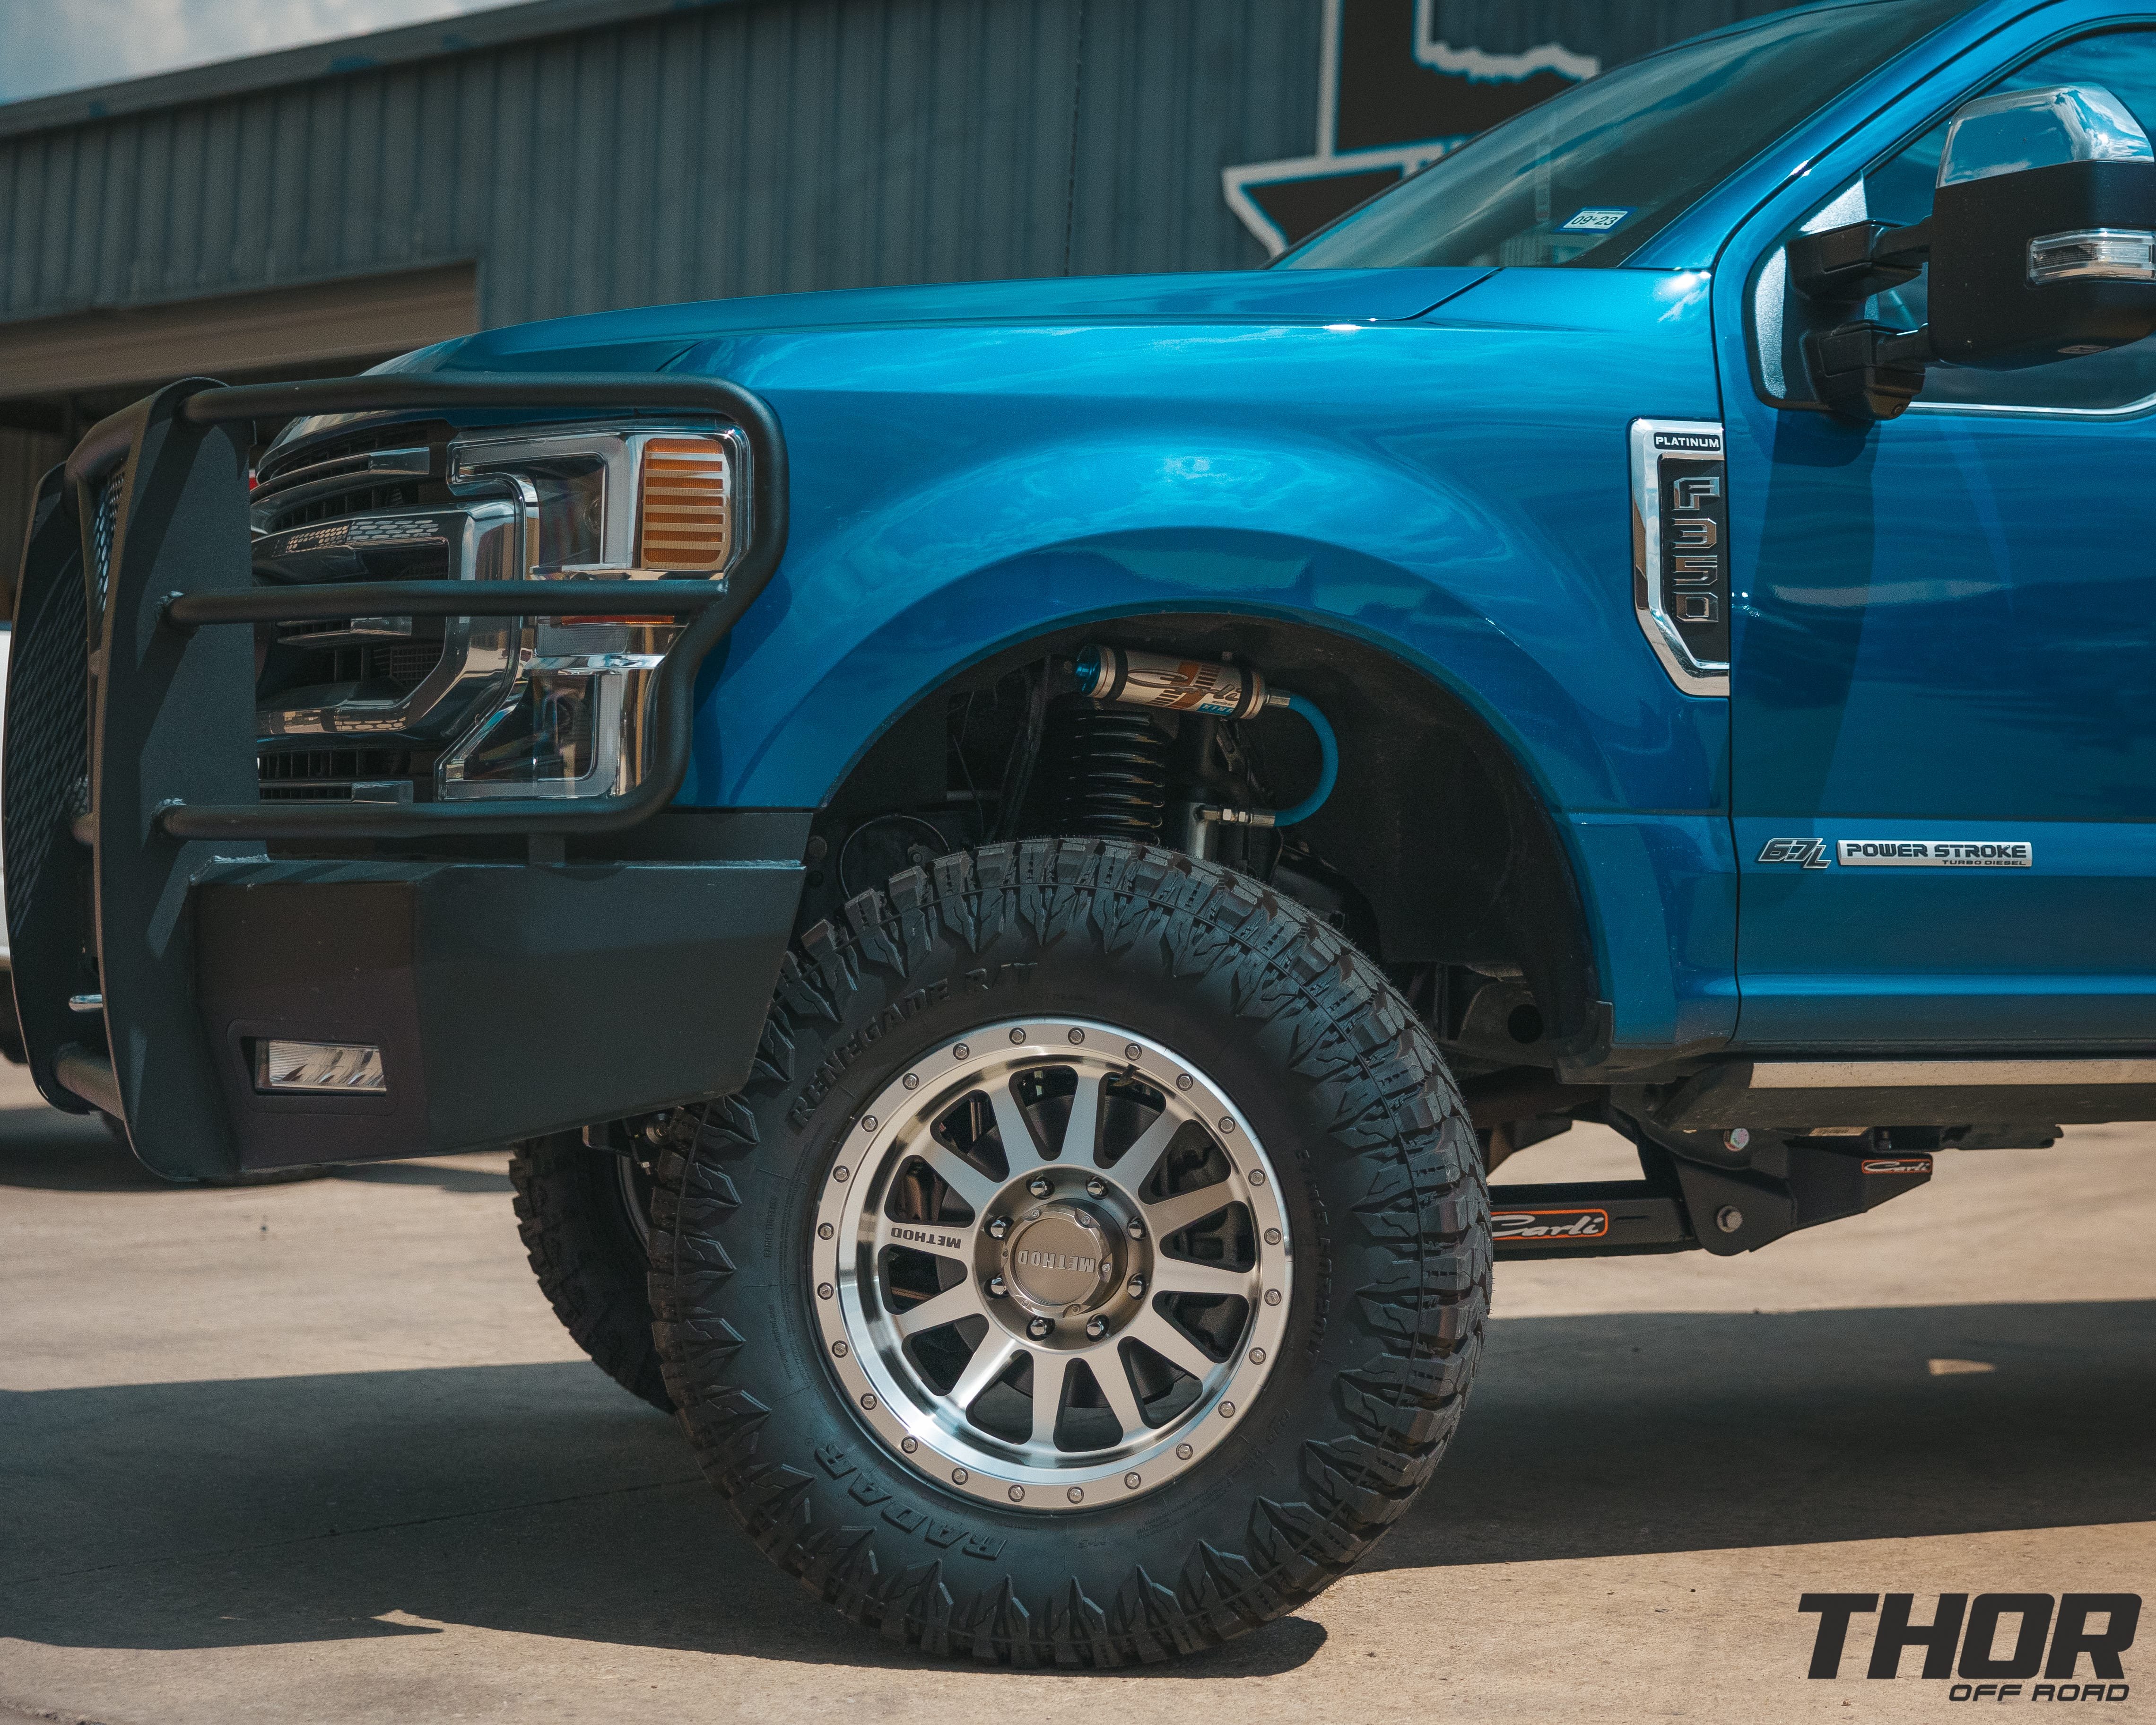 2022 Ford F-350 Super Duty Platinum in Atlas Blue with Carli 3.5" King Pintop Suspension Kit, Carli Radius Arms, Carli Torsion Sway Bar, Full Rear Leafs, Steelcraft Front Bumper, 20" Method Machined Standards, 37x13.50R20 Tires